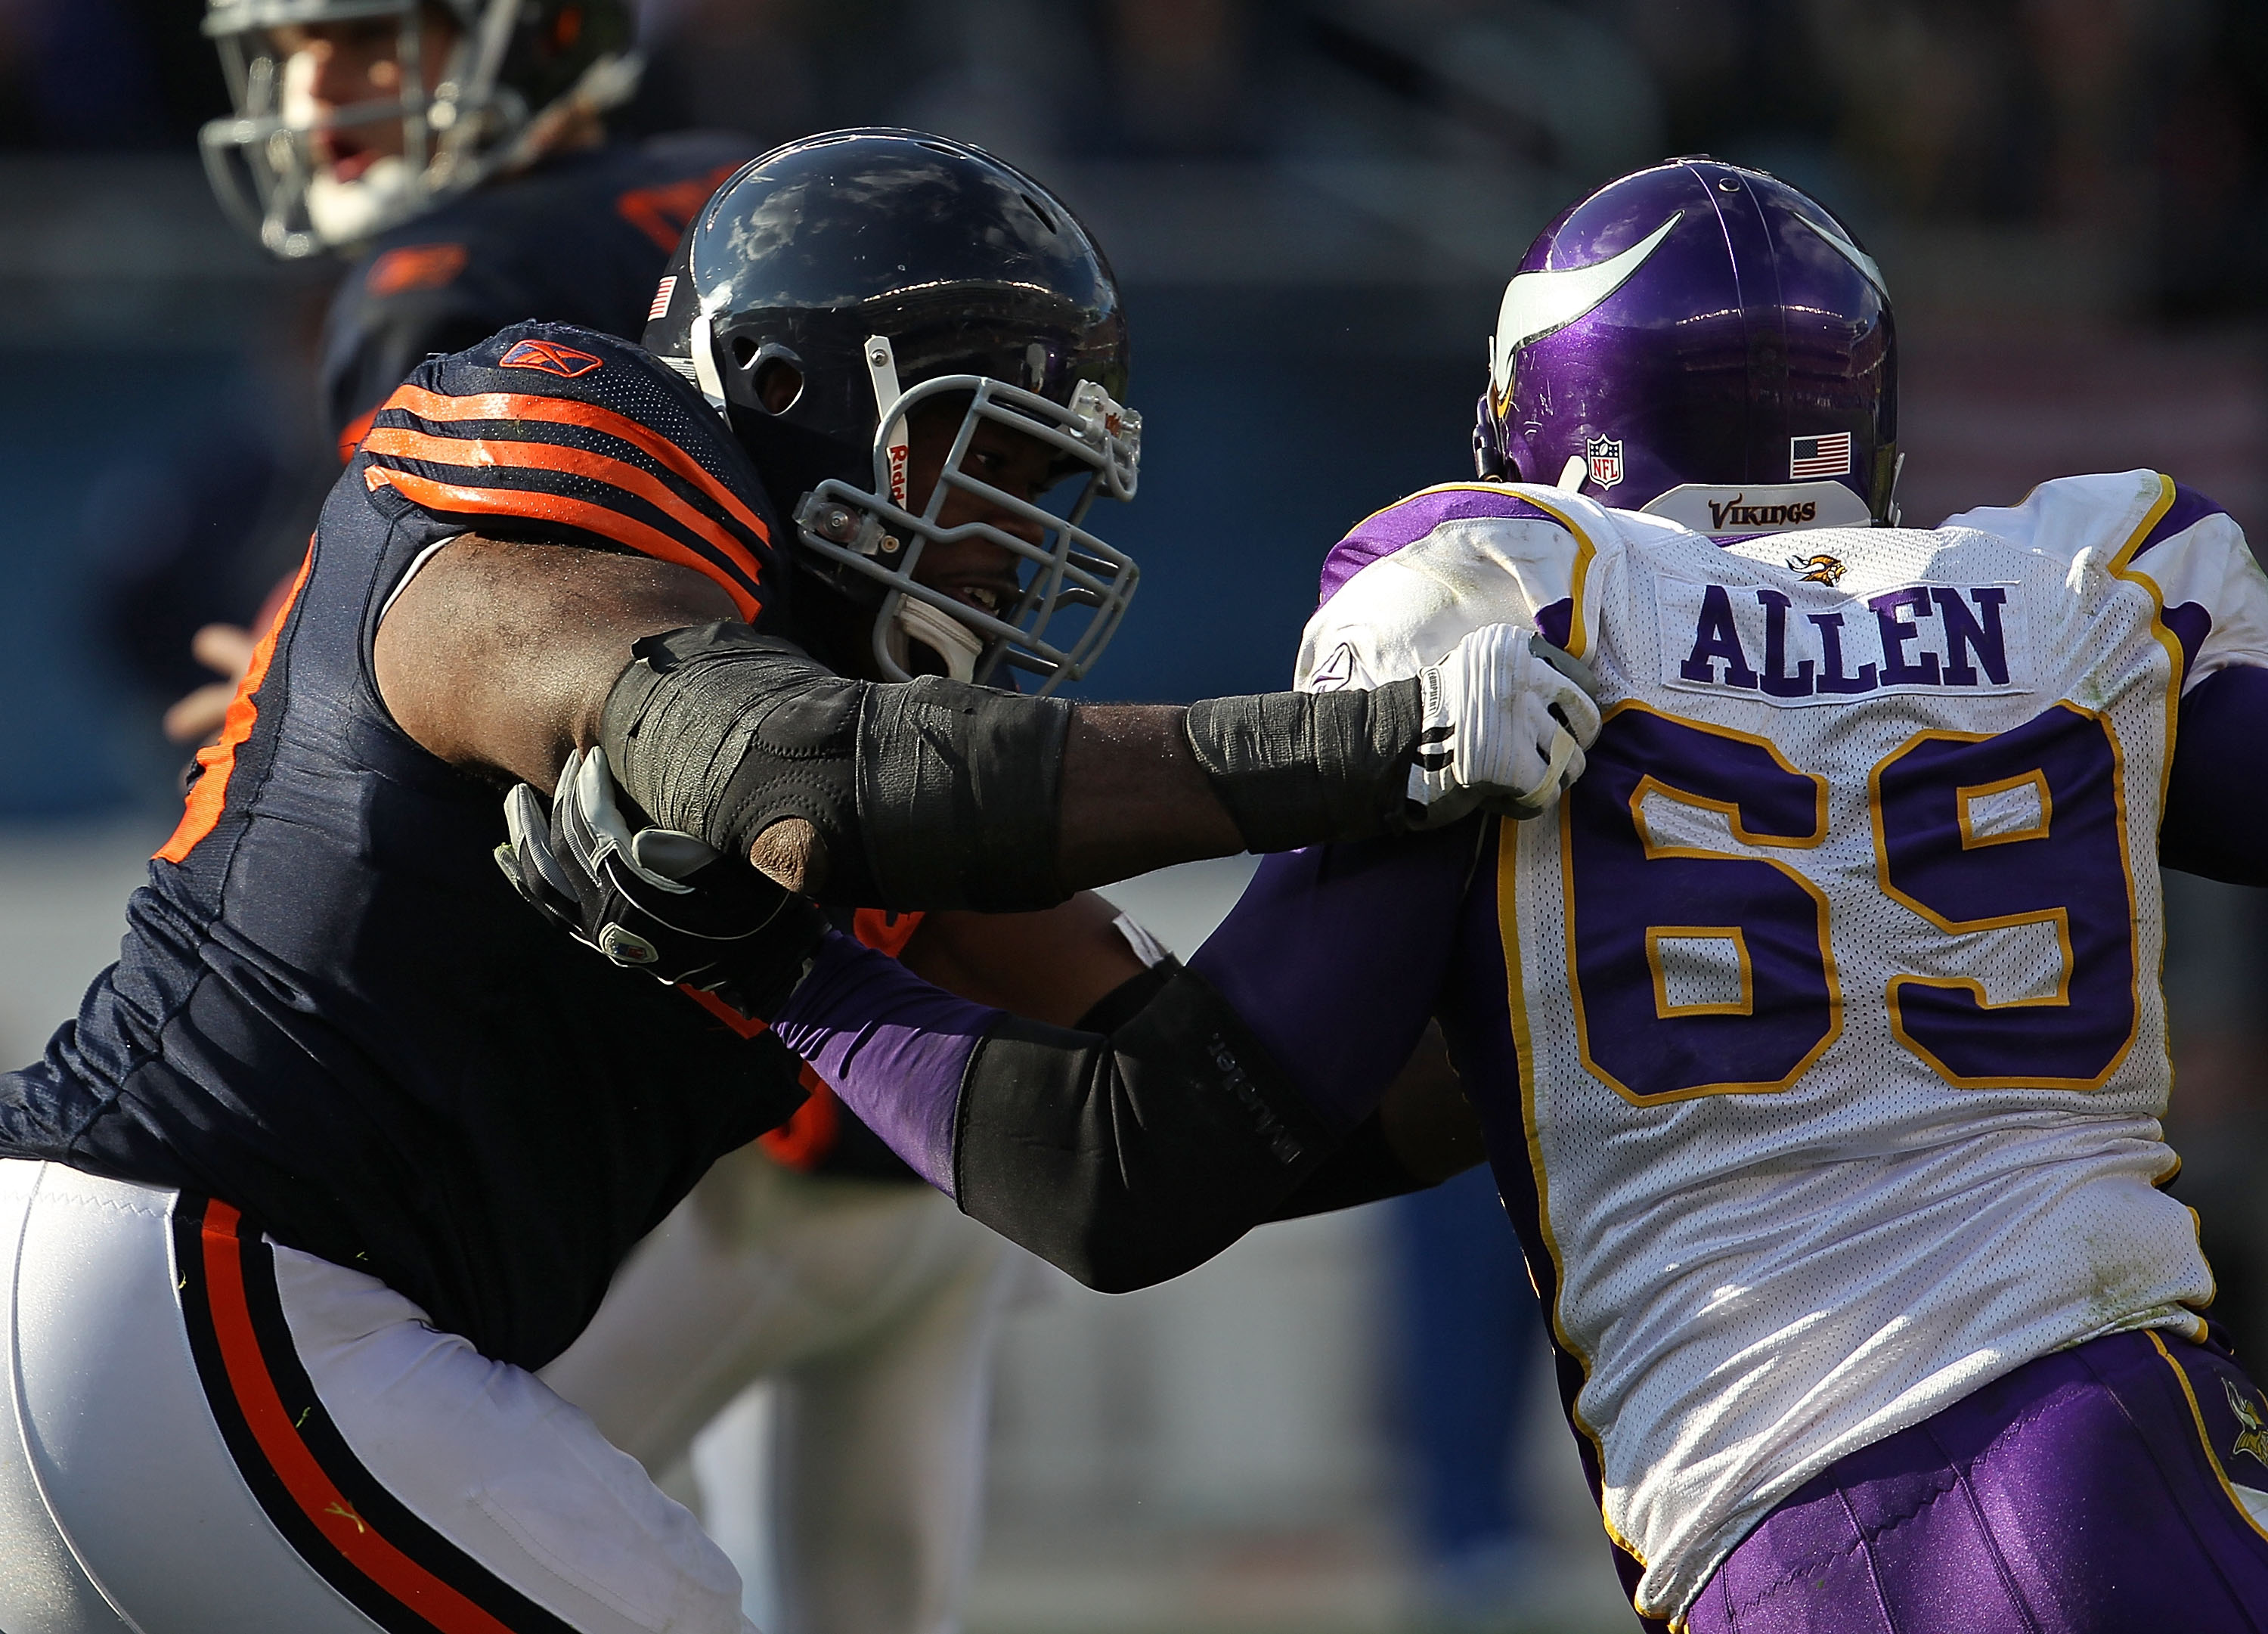 CHICAGO - NOVEMBER 14: Frank Omiyale #68 of the Chicago Bears grabs Jared Allen #69 of the Minnesota Vikings at Soldier Field on November 14, 2010 in Chicago, Illinois. The Bears defeated the Vikings 27-13. (Photo by Jonathan Daniel/Getty Images)